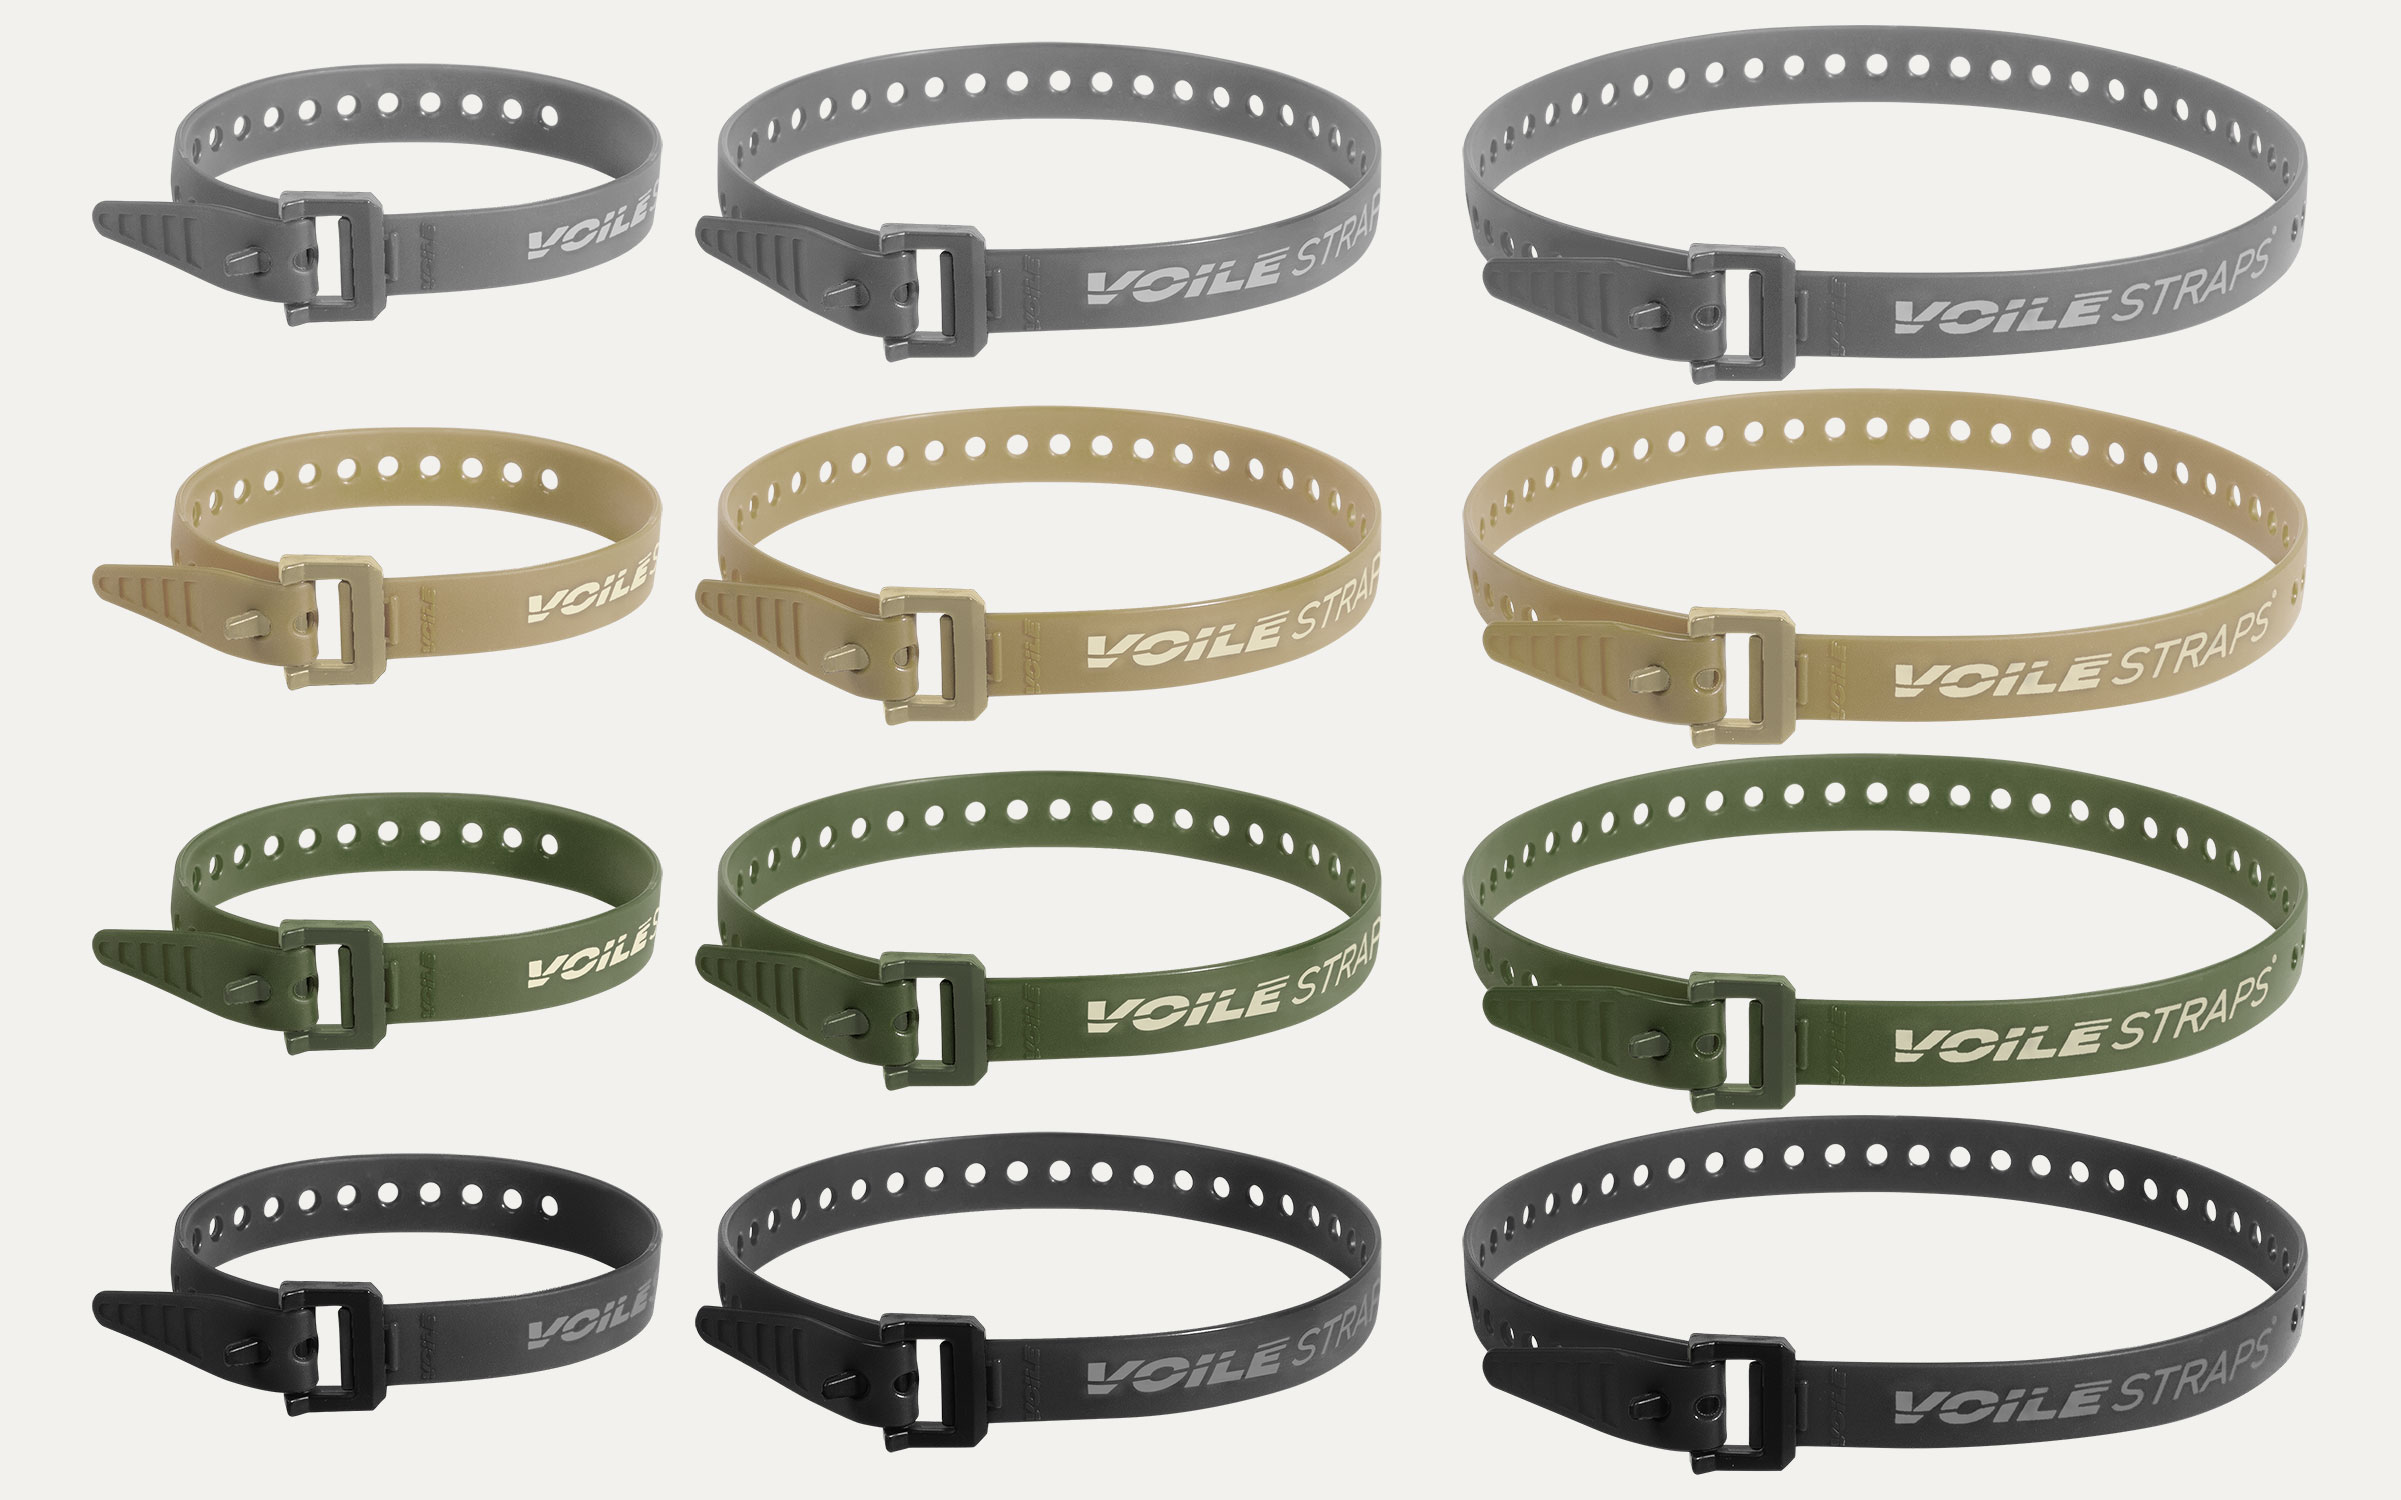 Voile Straps Now Come in 7 New Colors Including Olive and Tan 